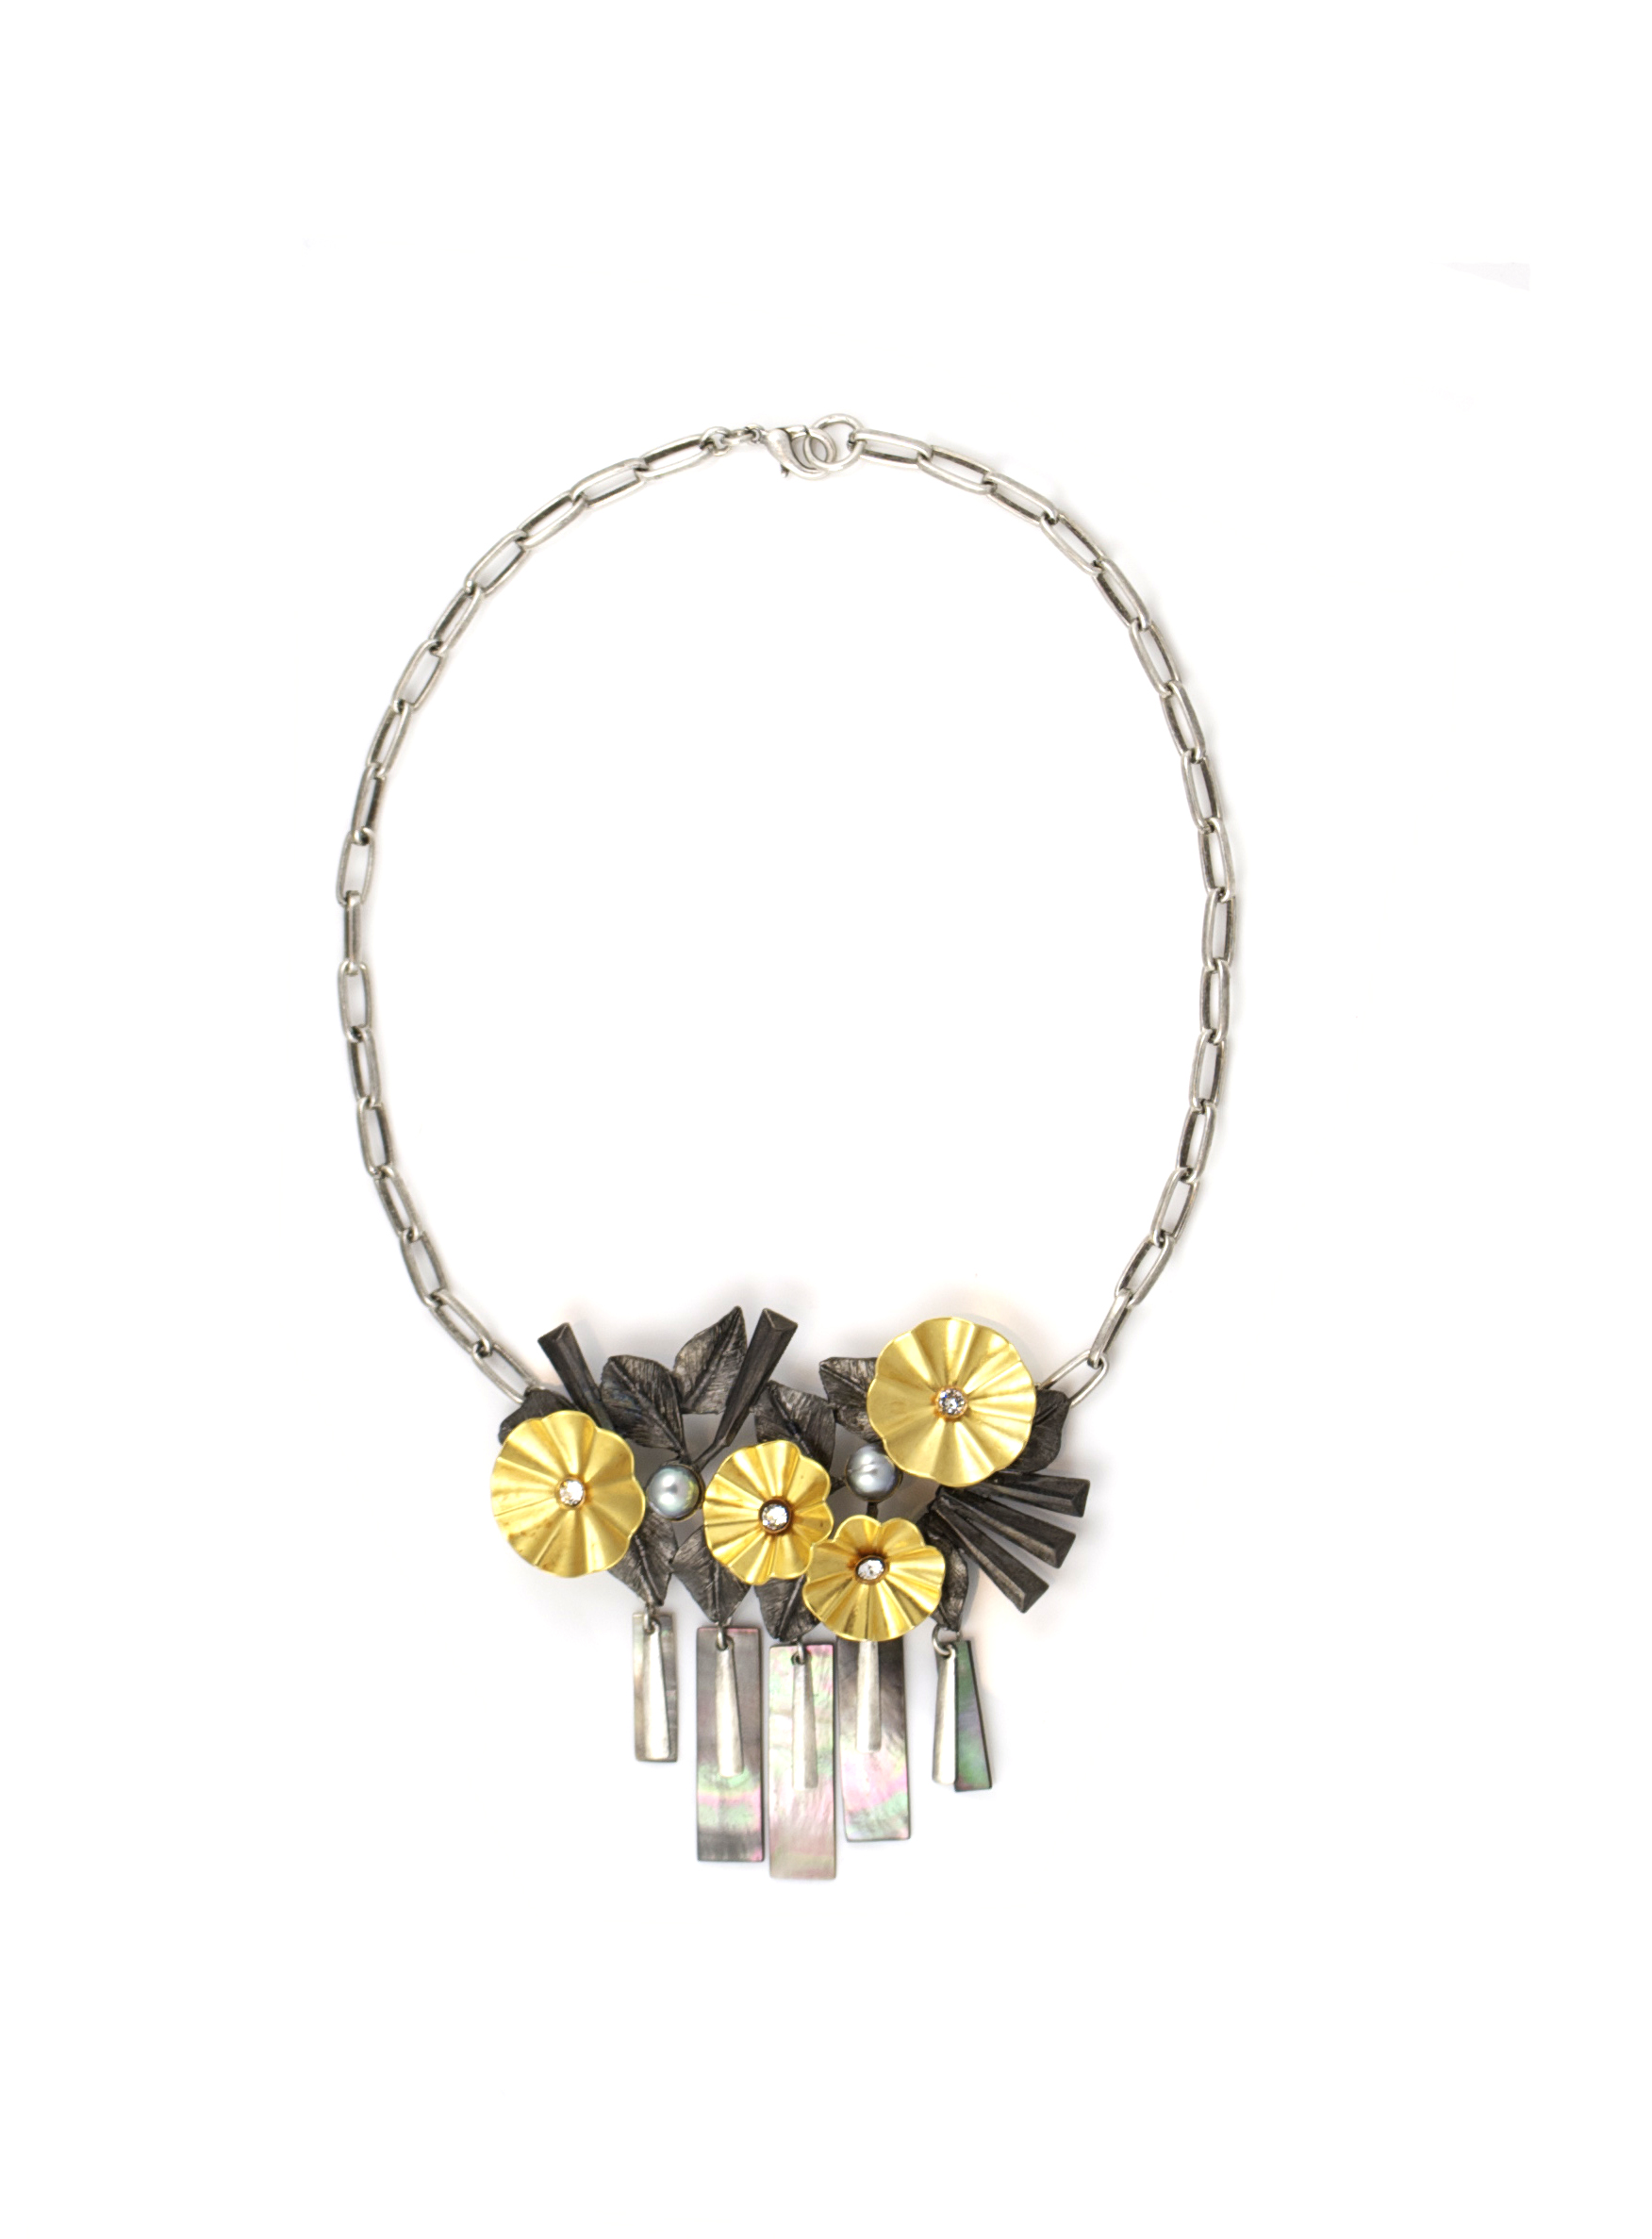  Flower Cloud necklace,  available at Gerard Yosca .&nbsp; 